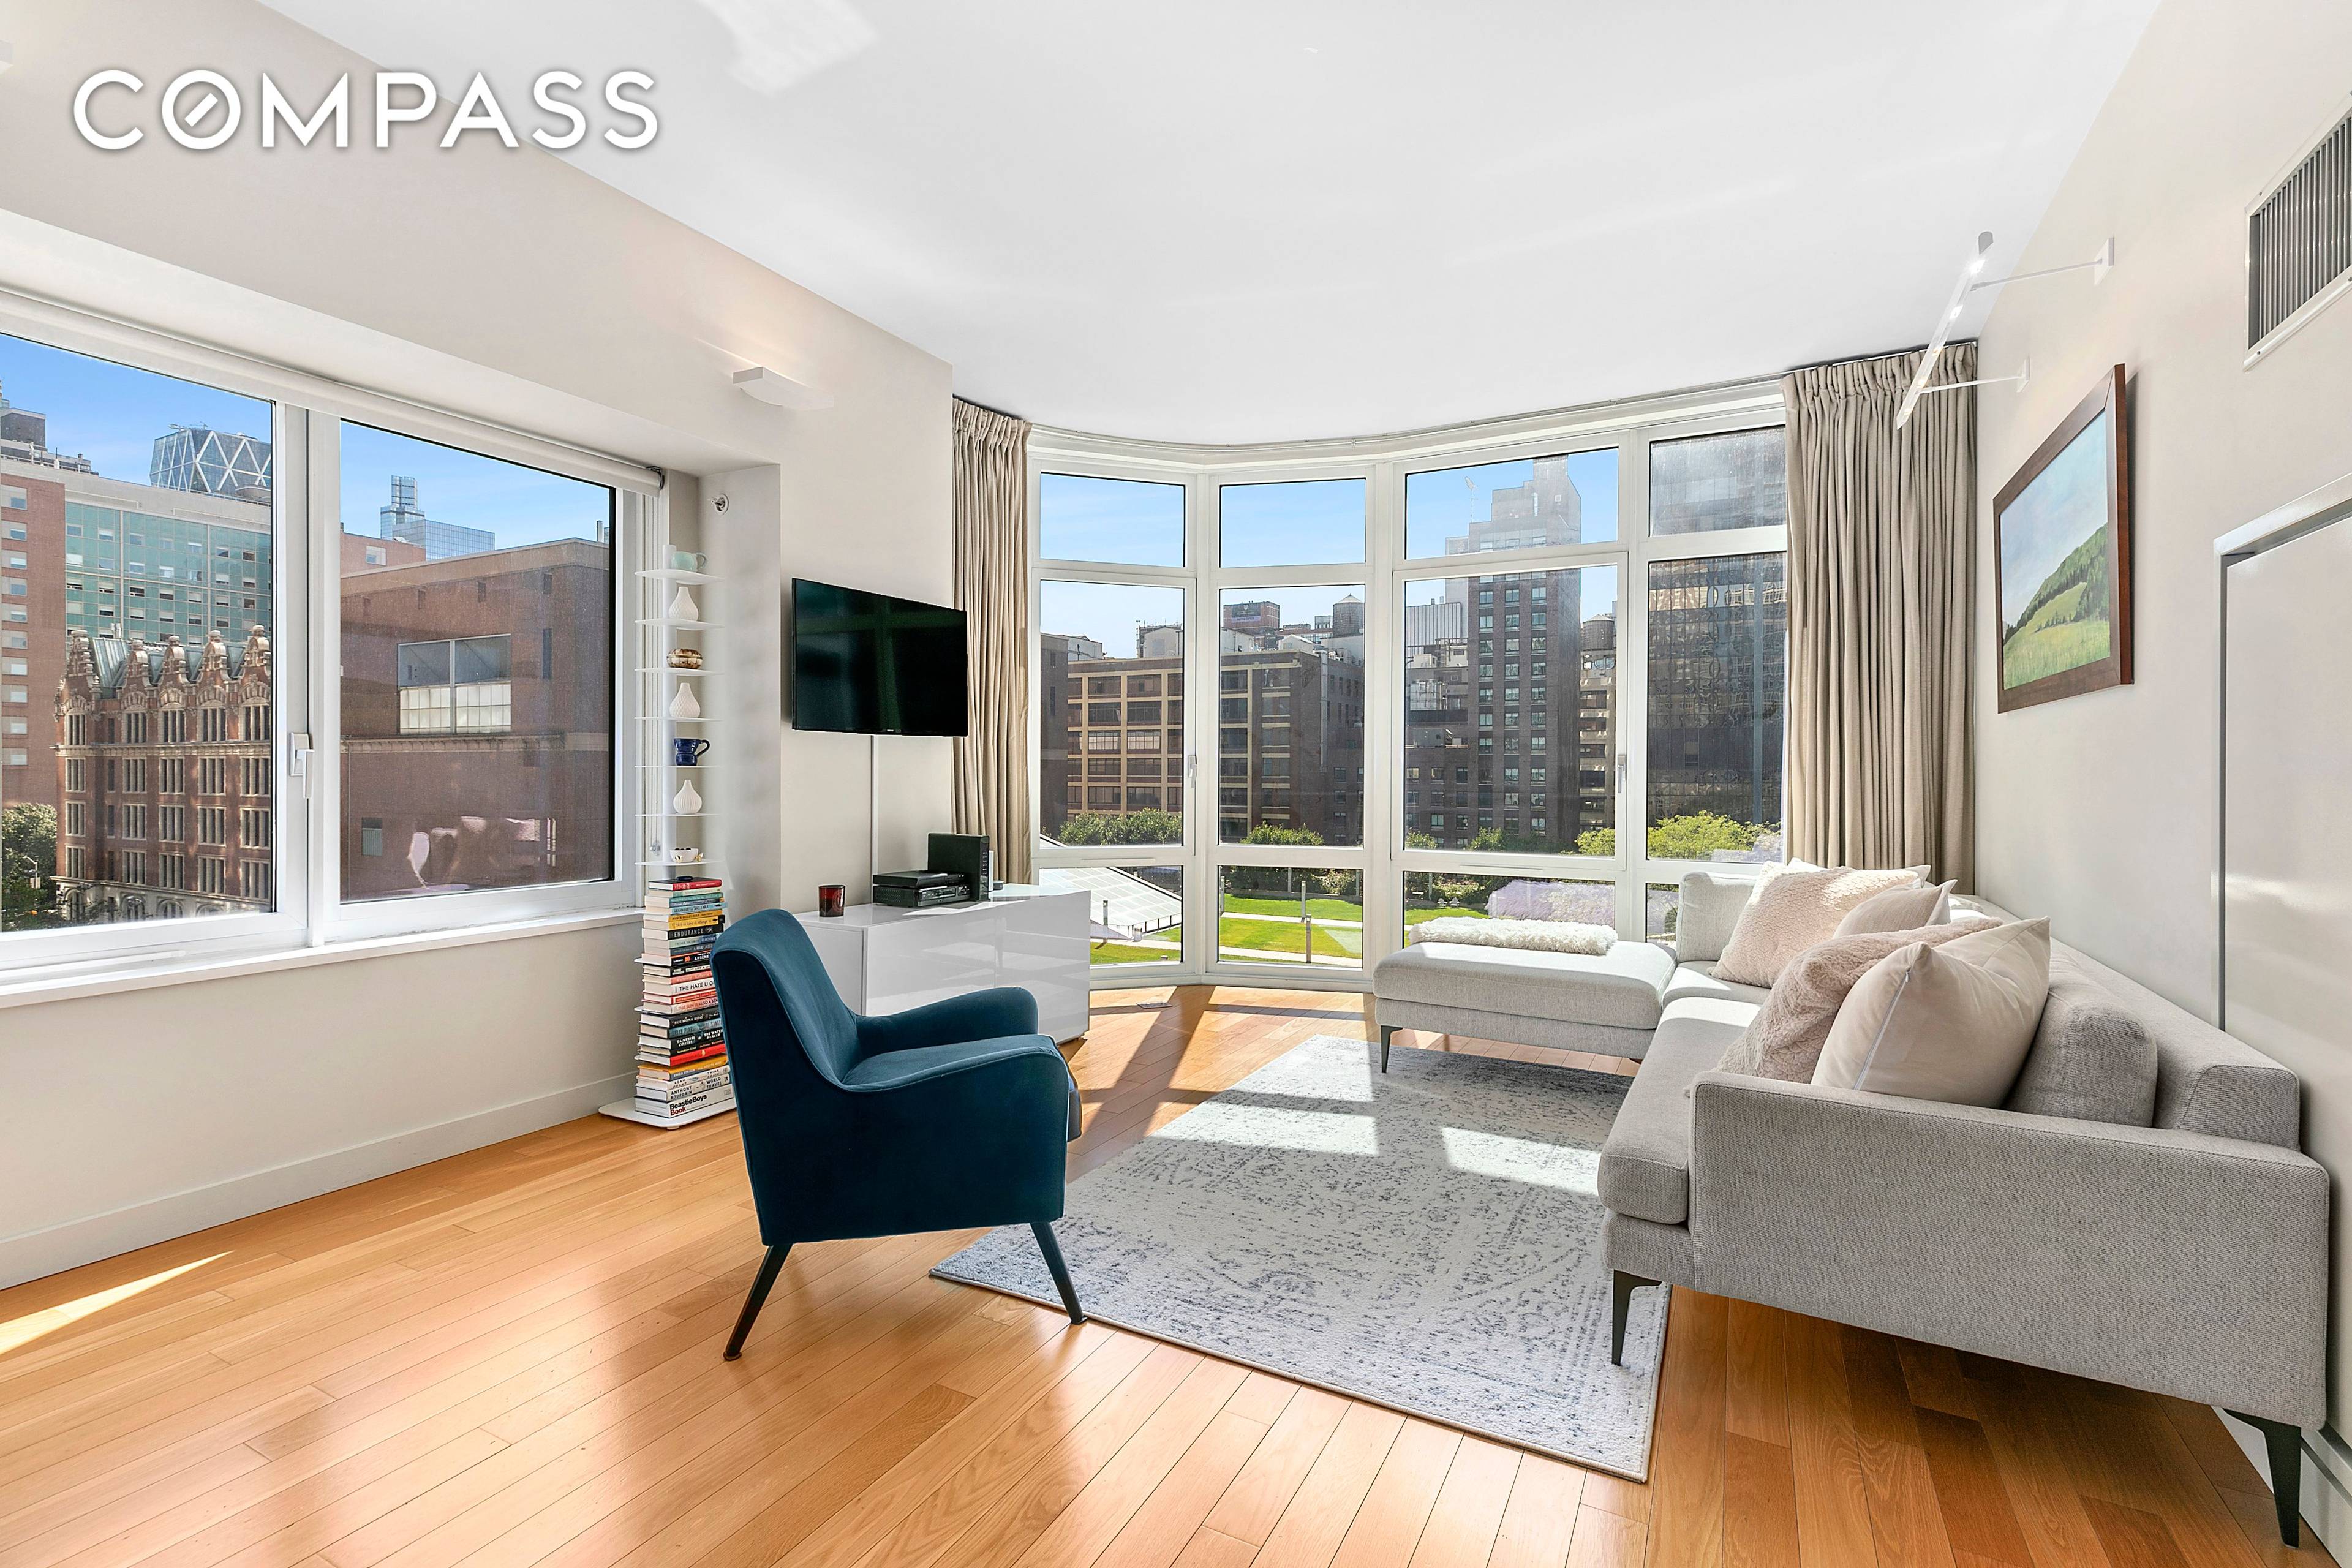 Expansive living space and wide open city views await in this stunning two bedroom, two bathroom residence in an exceptional, amenity rich condominium in the heart of Lincoln Square.